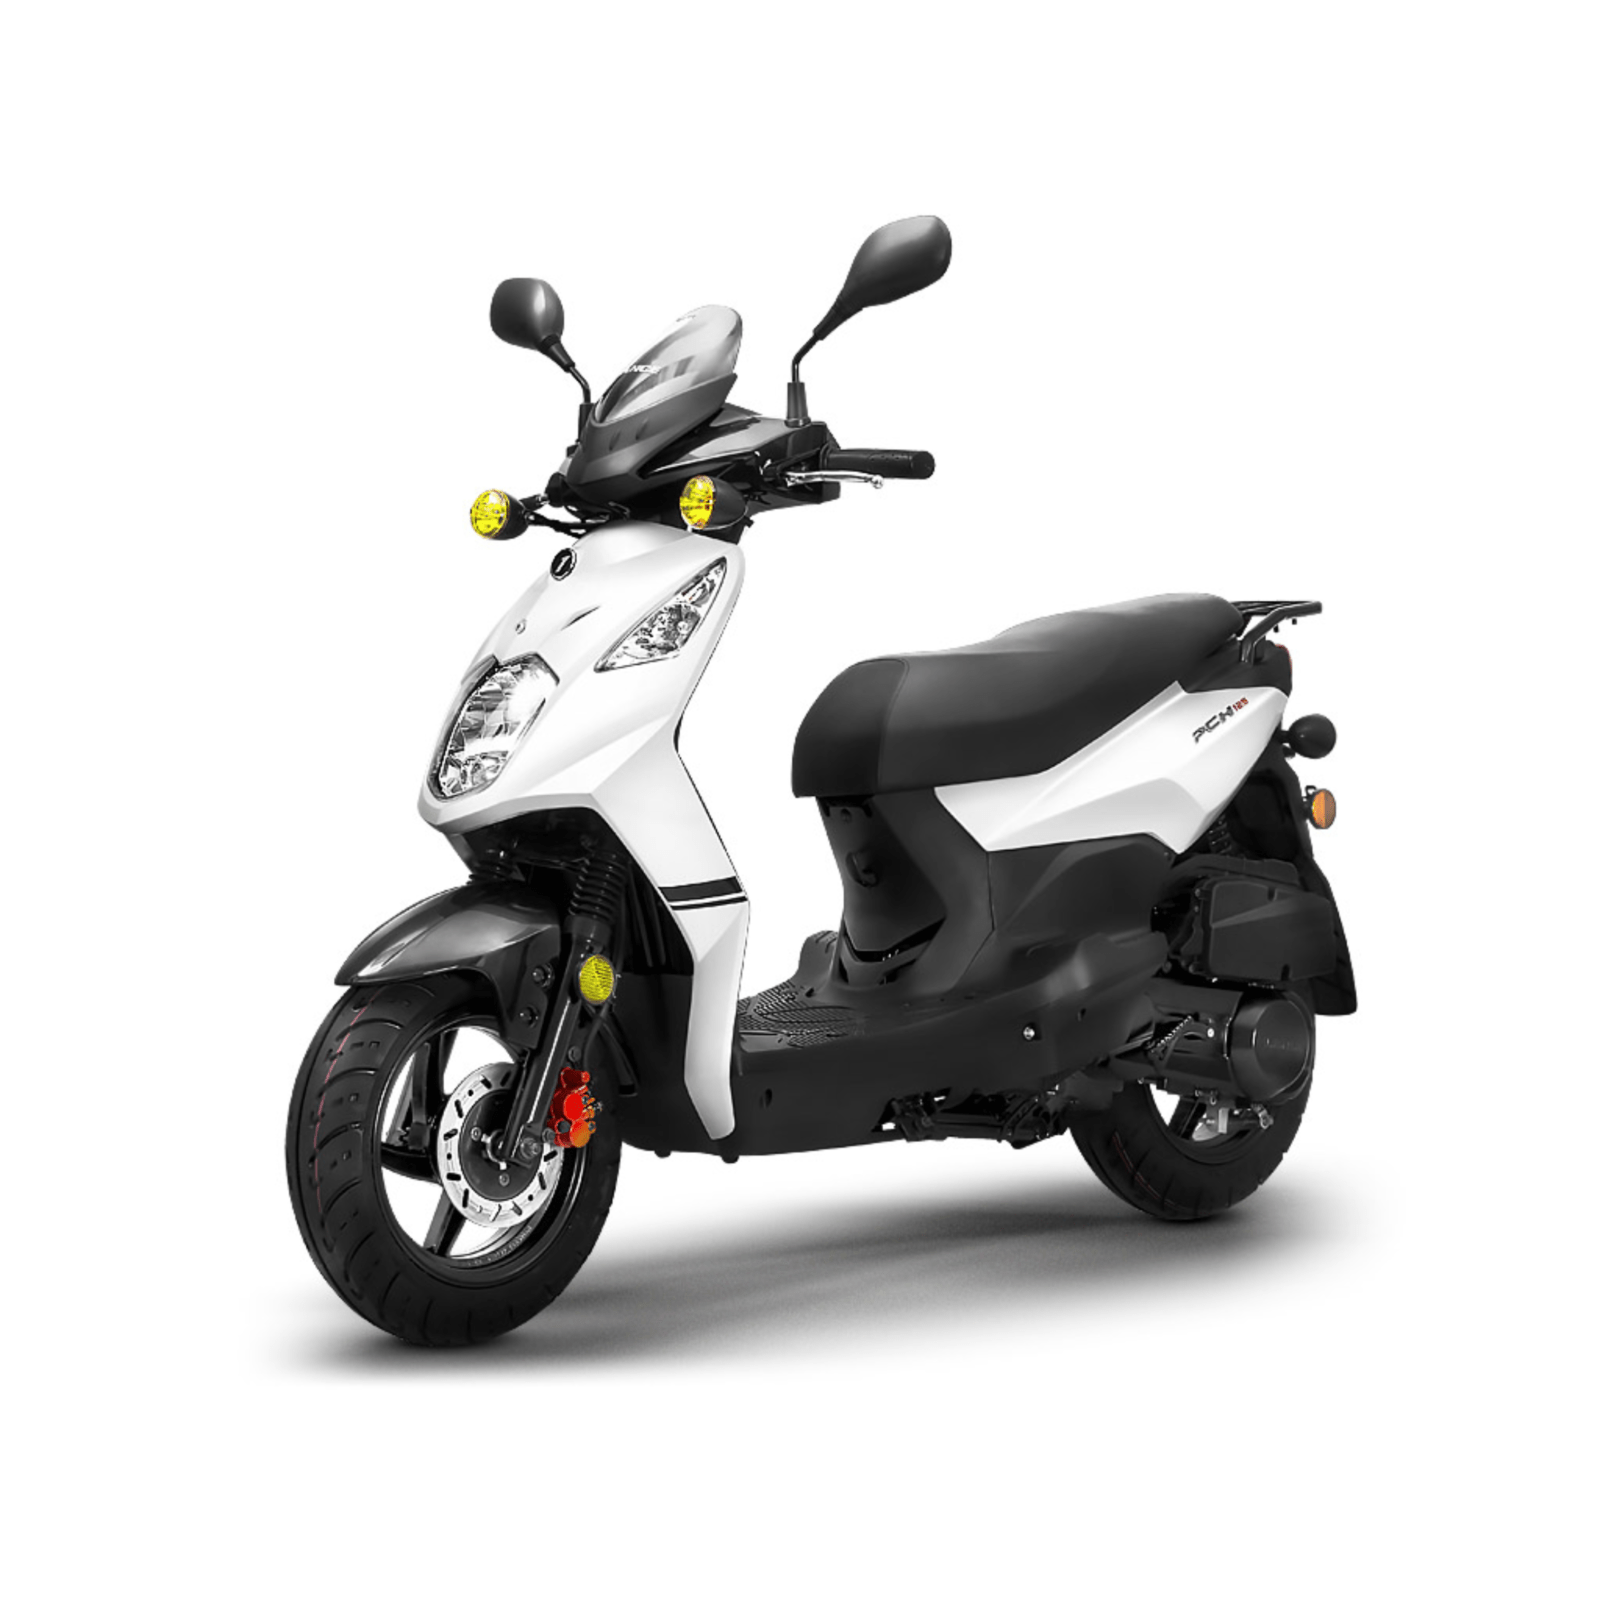 KYMCO Agility City 125 - Europe's Leading 125cc scooter 